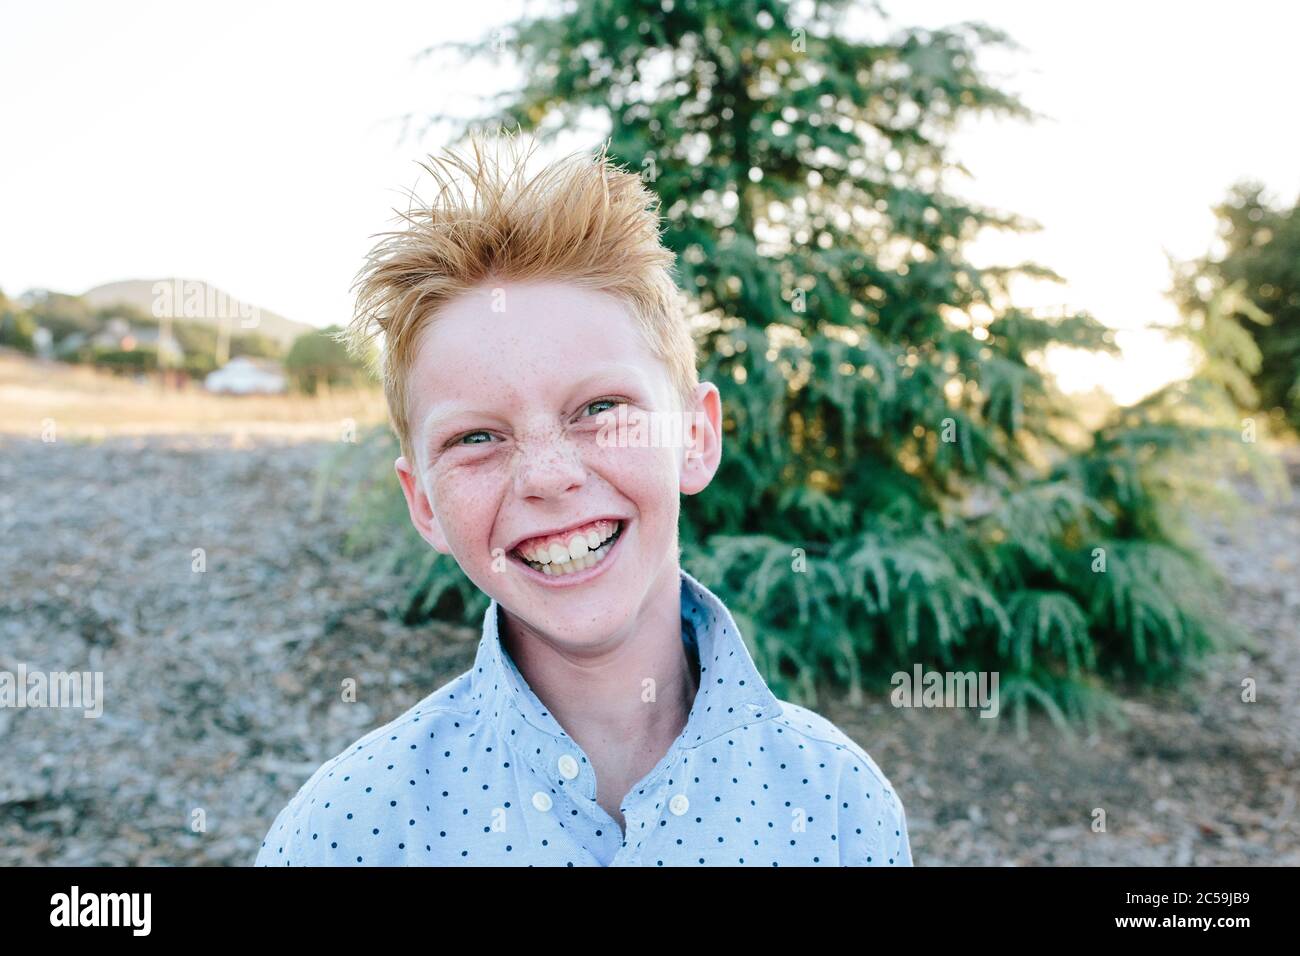 A Red Headed Boy With Freckles Smiling A Crazy Smile Stock Photo